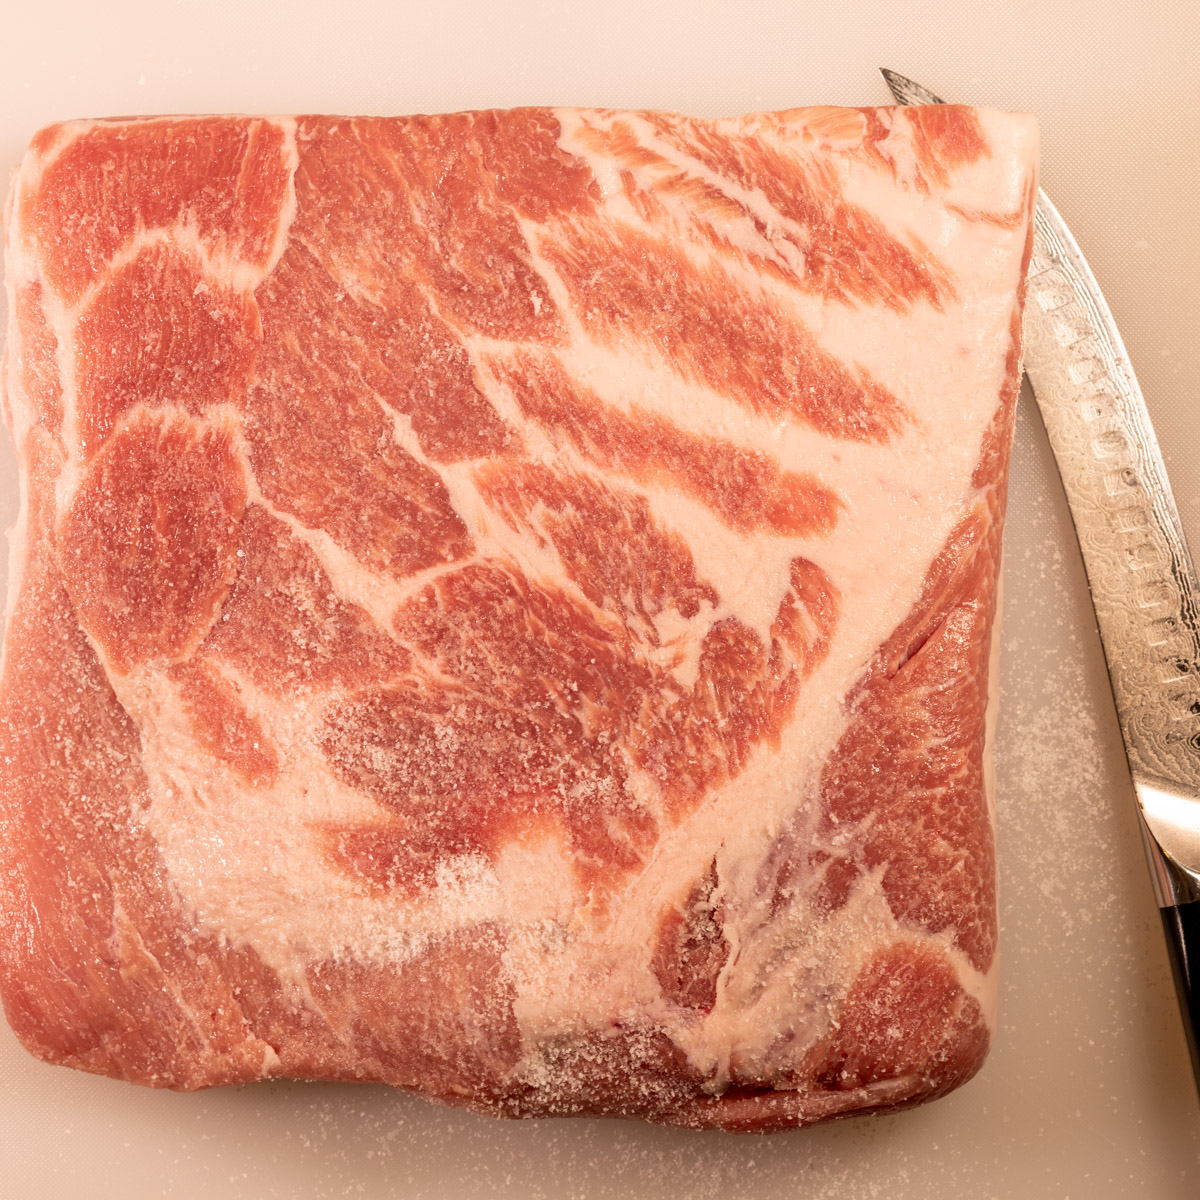 Trim excess fat from the pork shoulder.